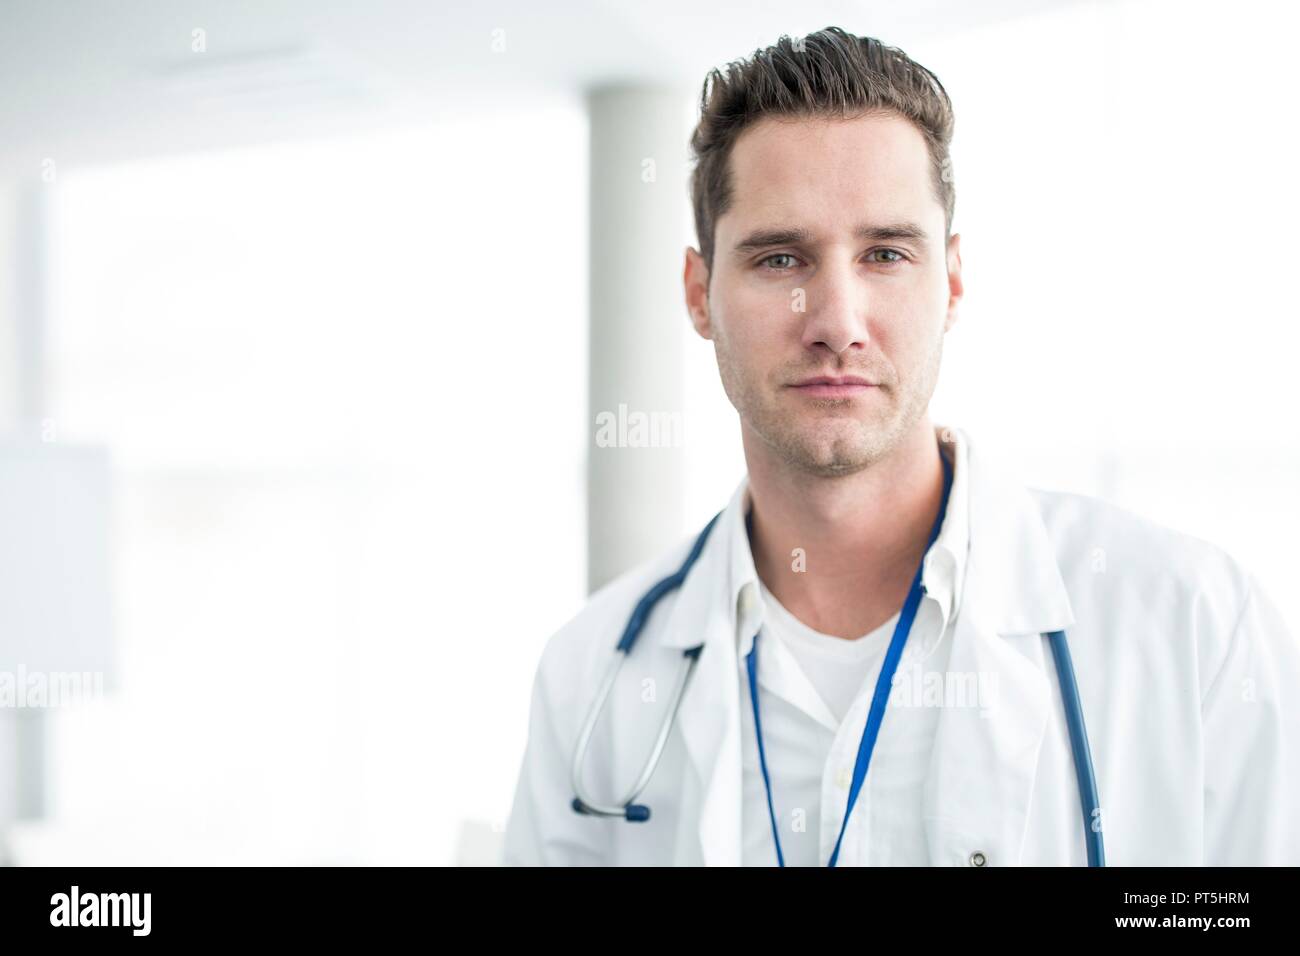 Portrait of mature male doctor looking at camera. Stock Photo